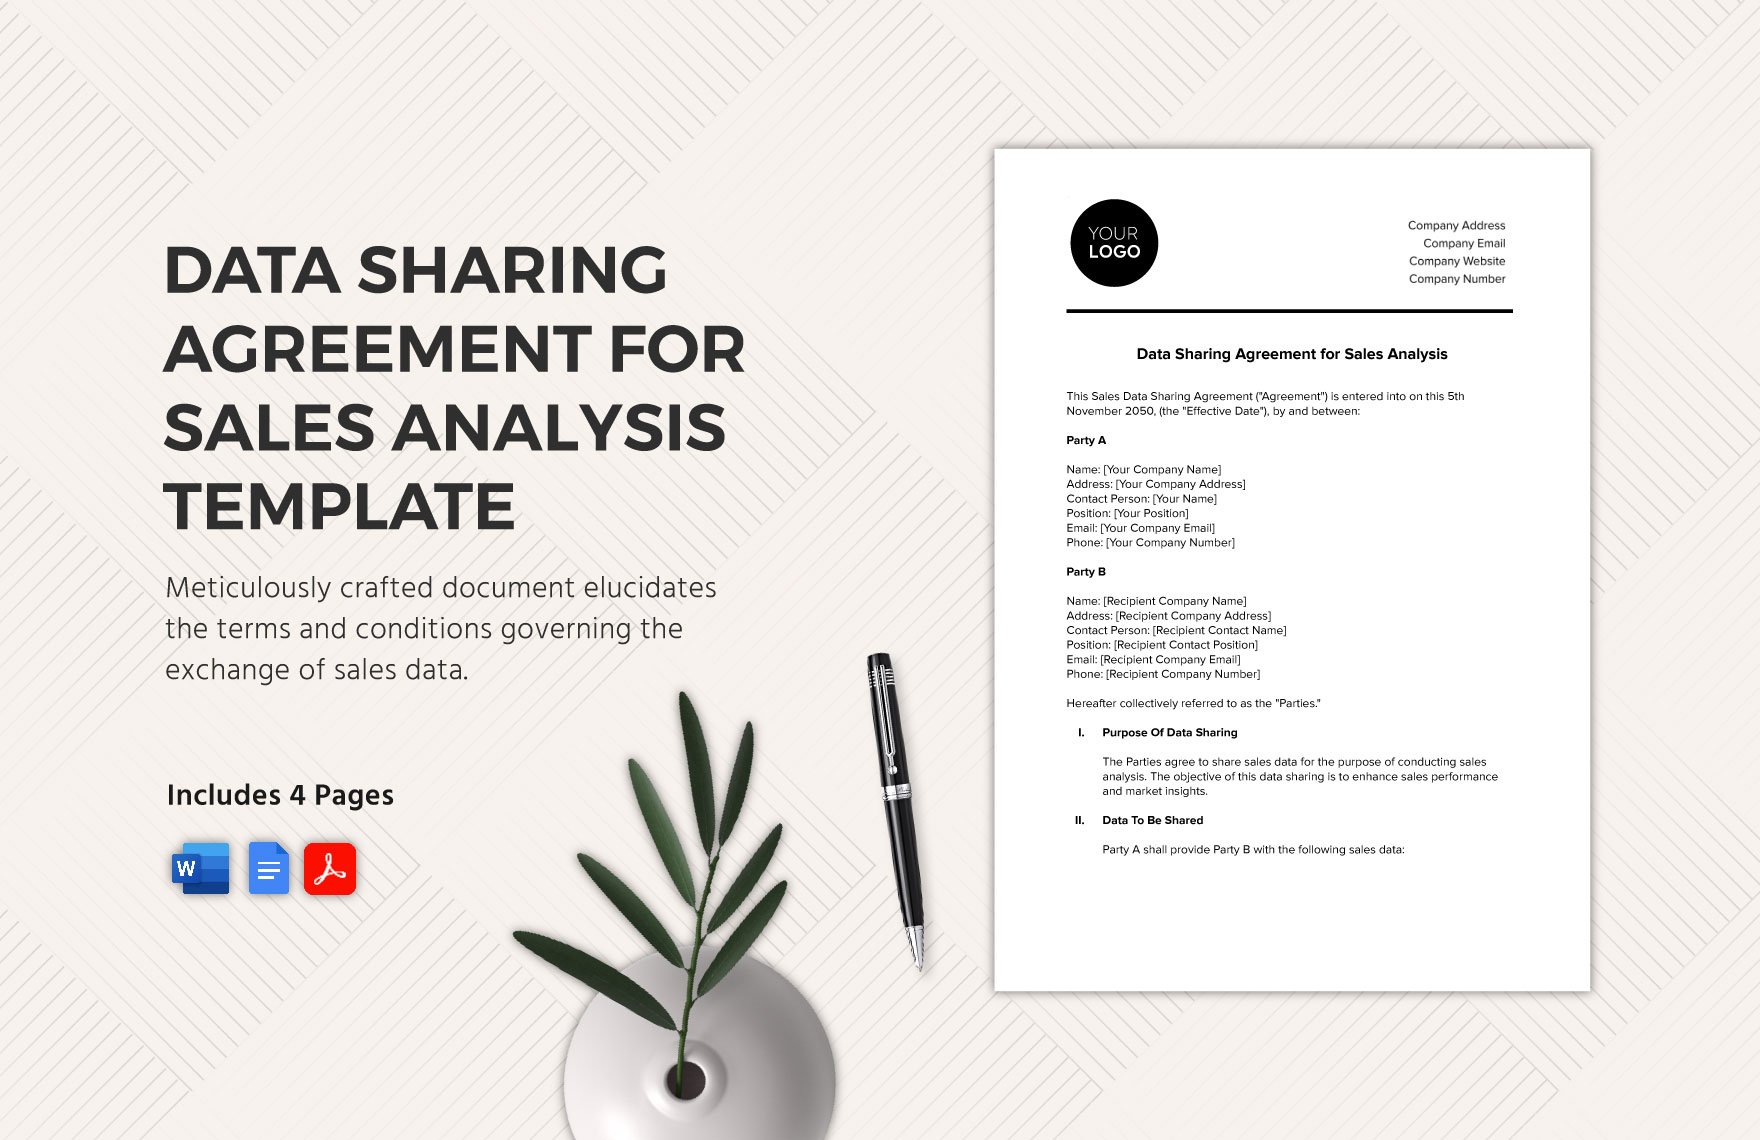 Data Sharing Agreement for Sales Analysis Template in Word, Google Docs, PDF